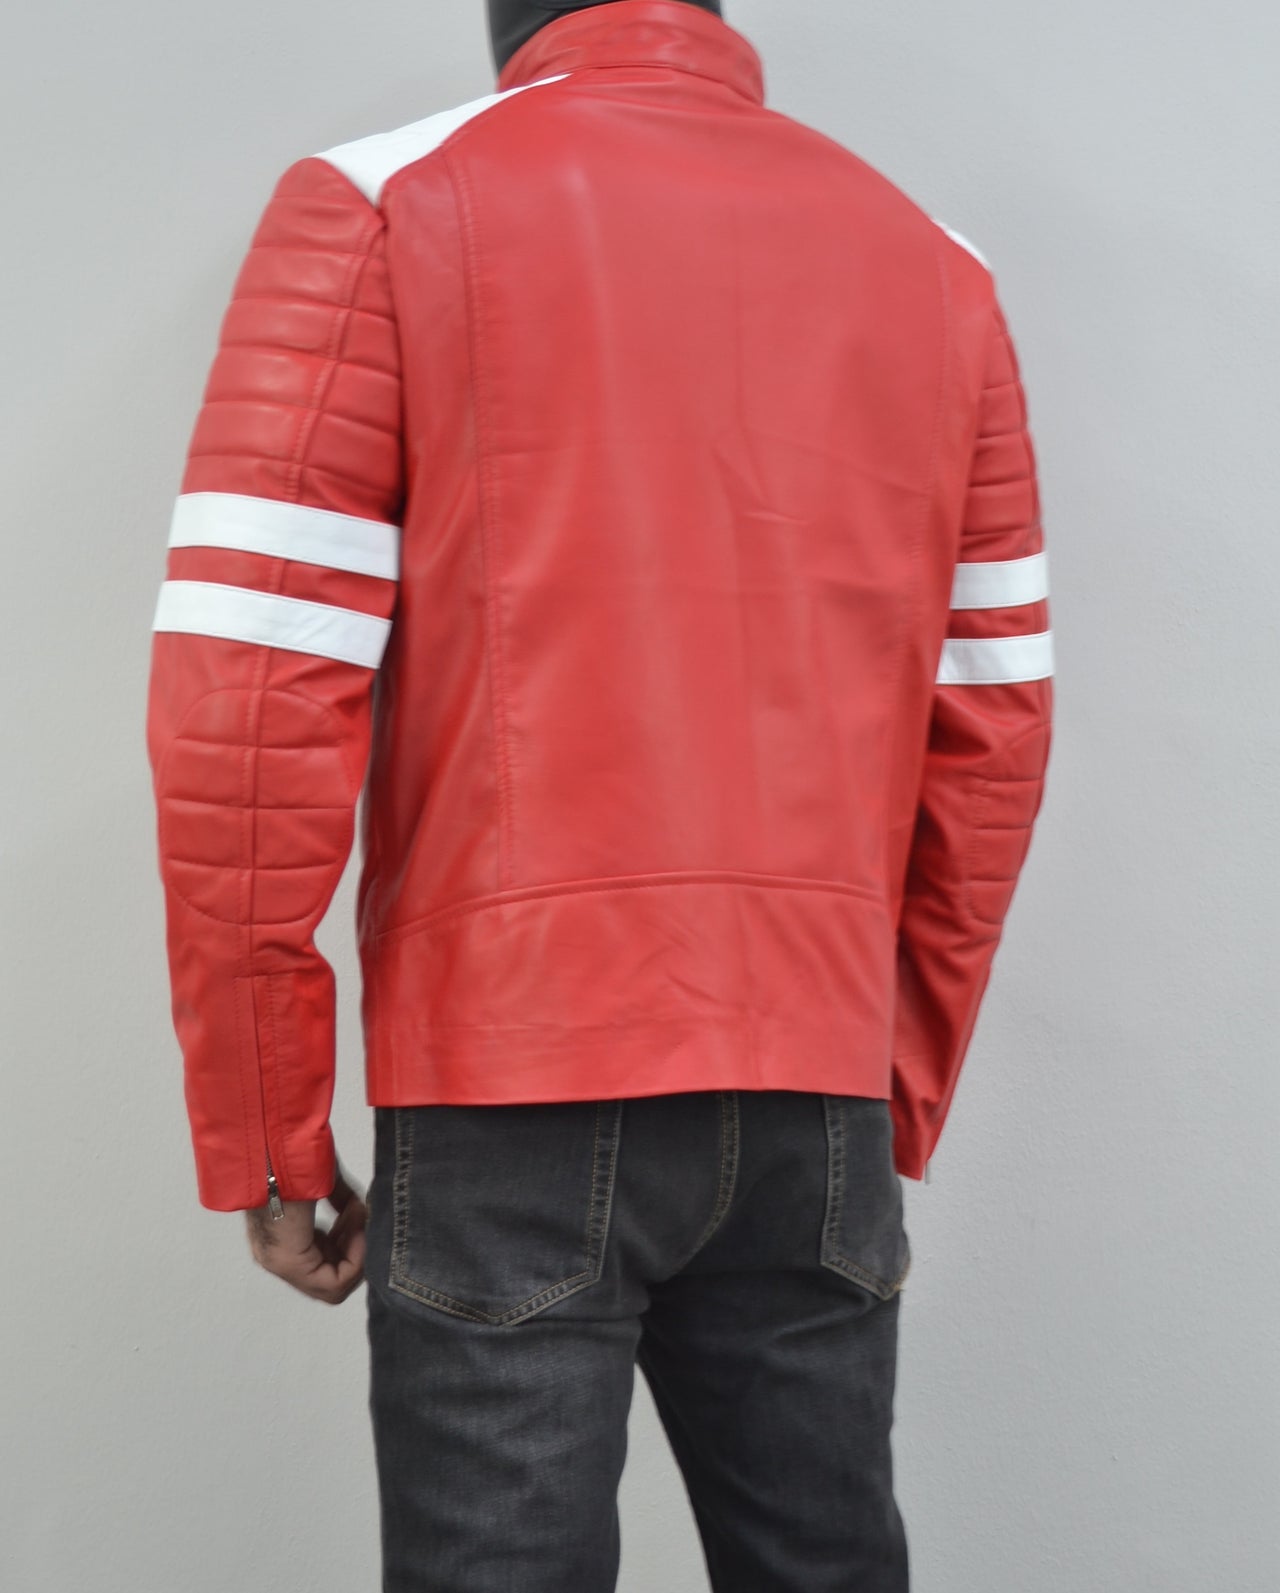 Mens Fight Club Brad Pitt Red And White Stripe Racer Leather Jacket